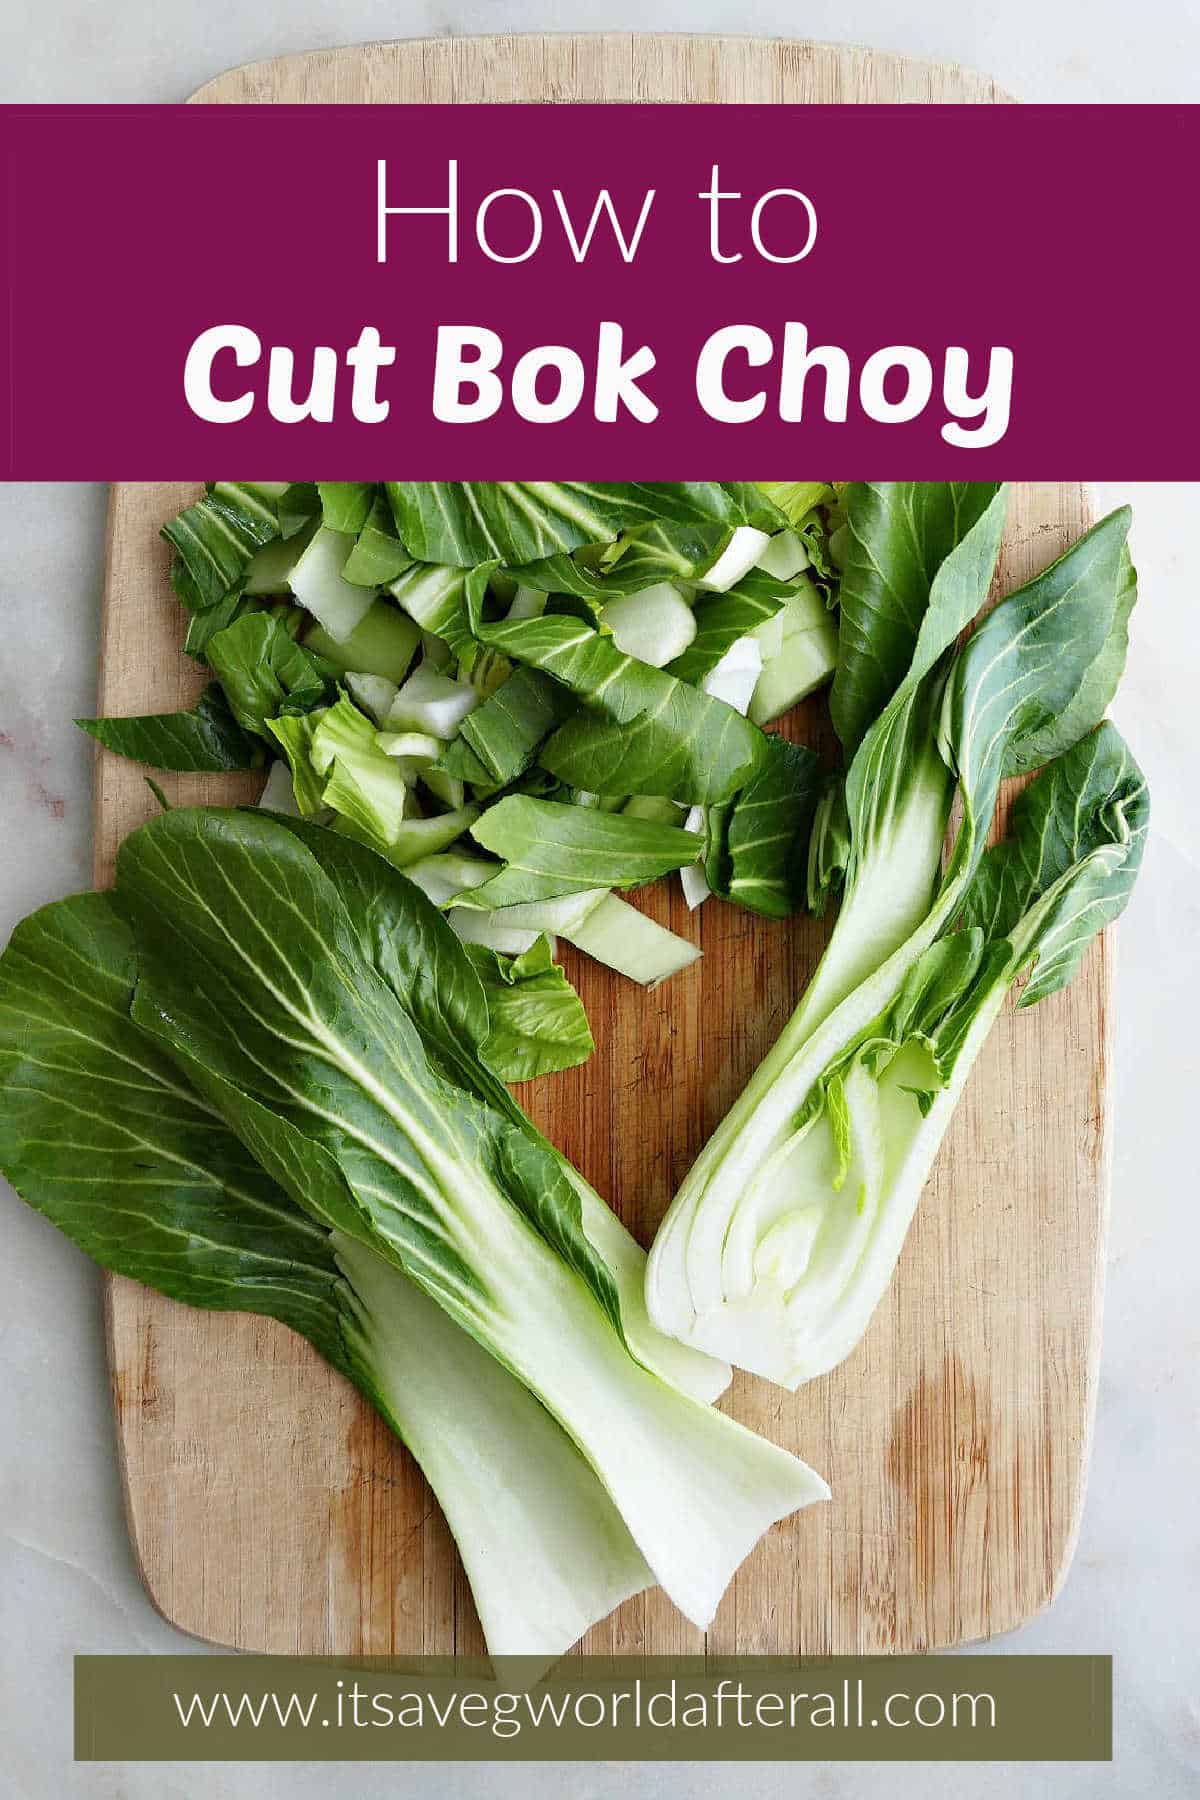 image of sliced and chopped bok choy on a cutting board under text box